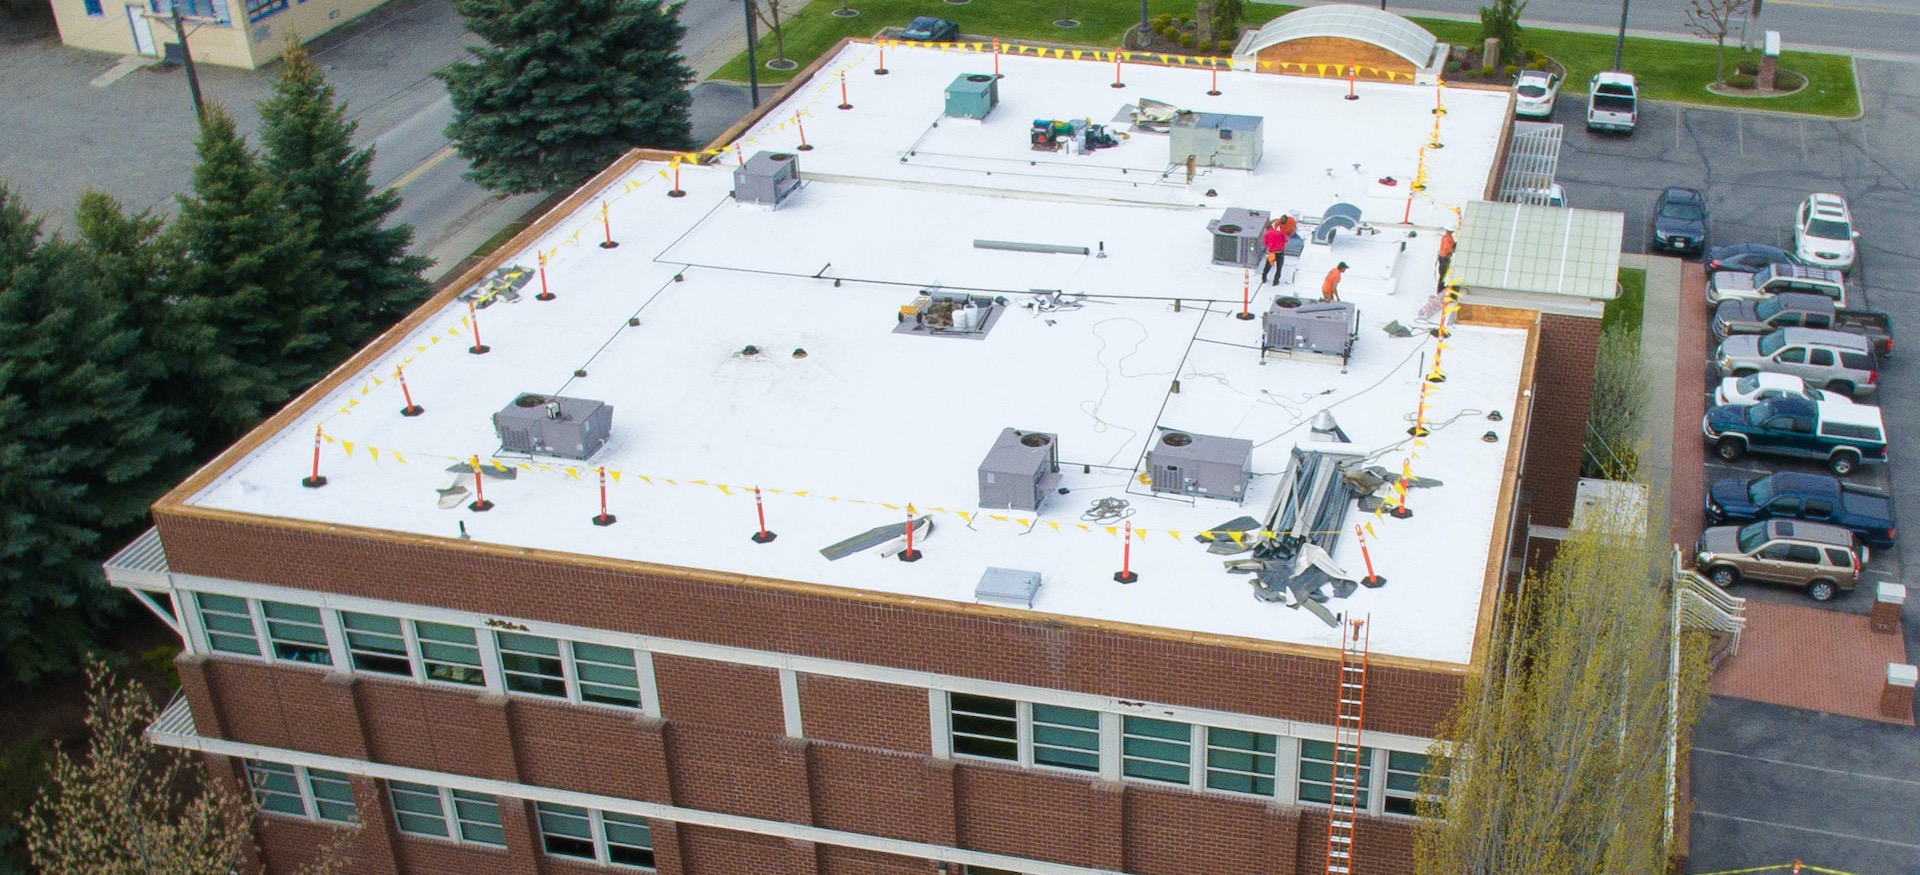 Commercial Flat Roof Replacement Crew Working Safely And Efficiently - Aerial View